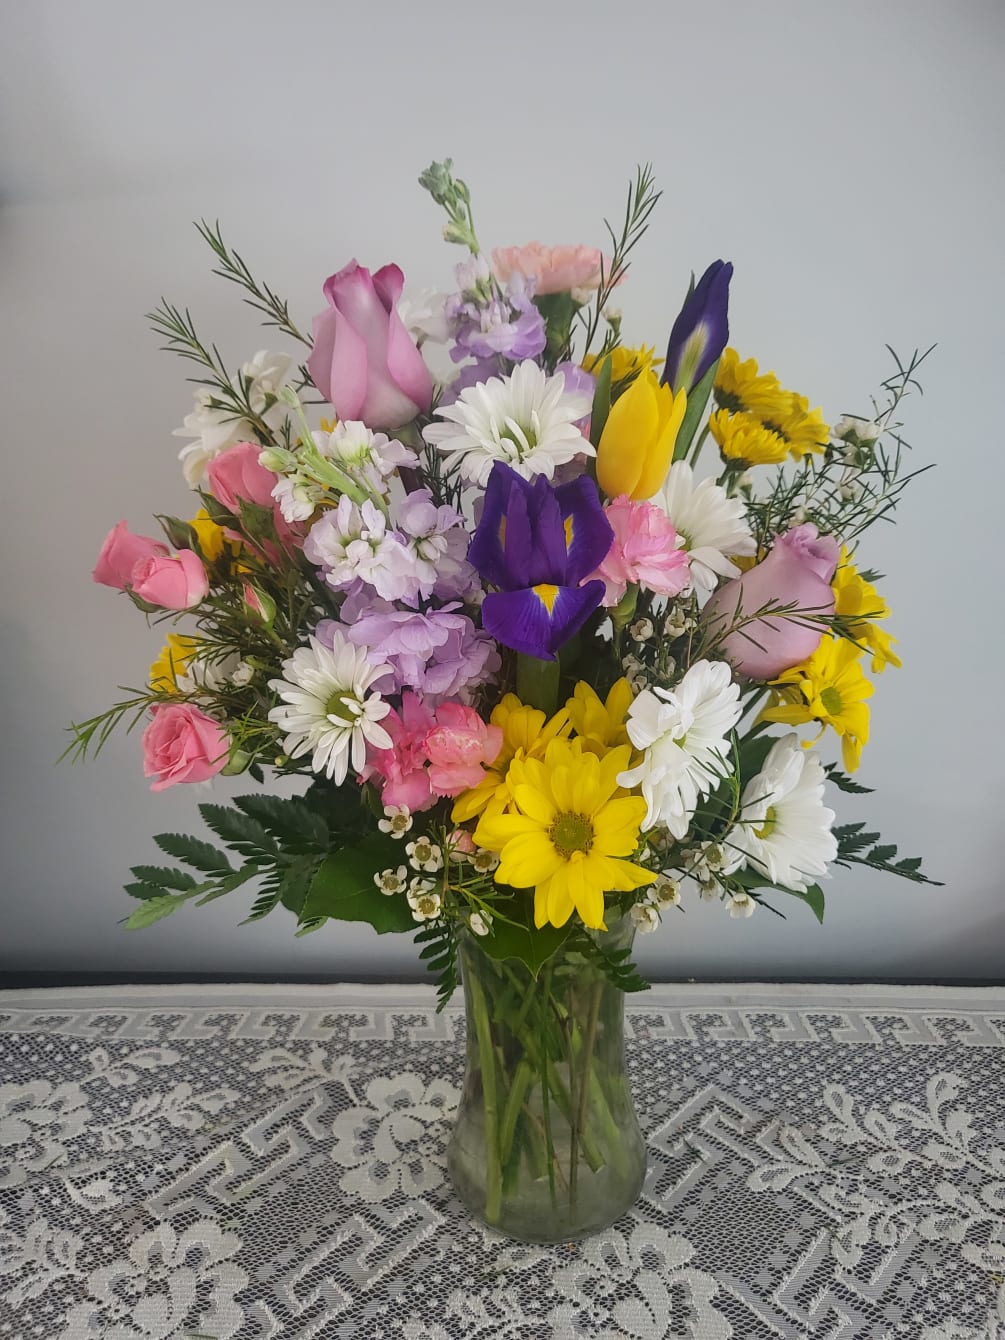 Summer colors and blooms like iris ,roses,daisies and mini pink carnations